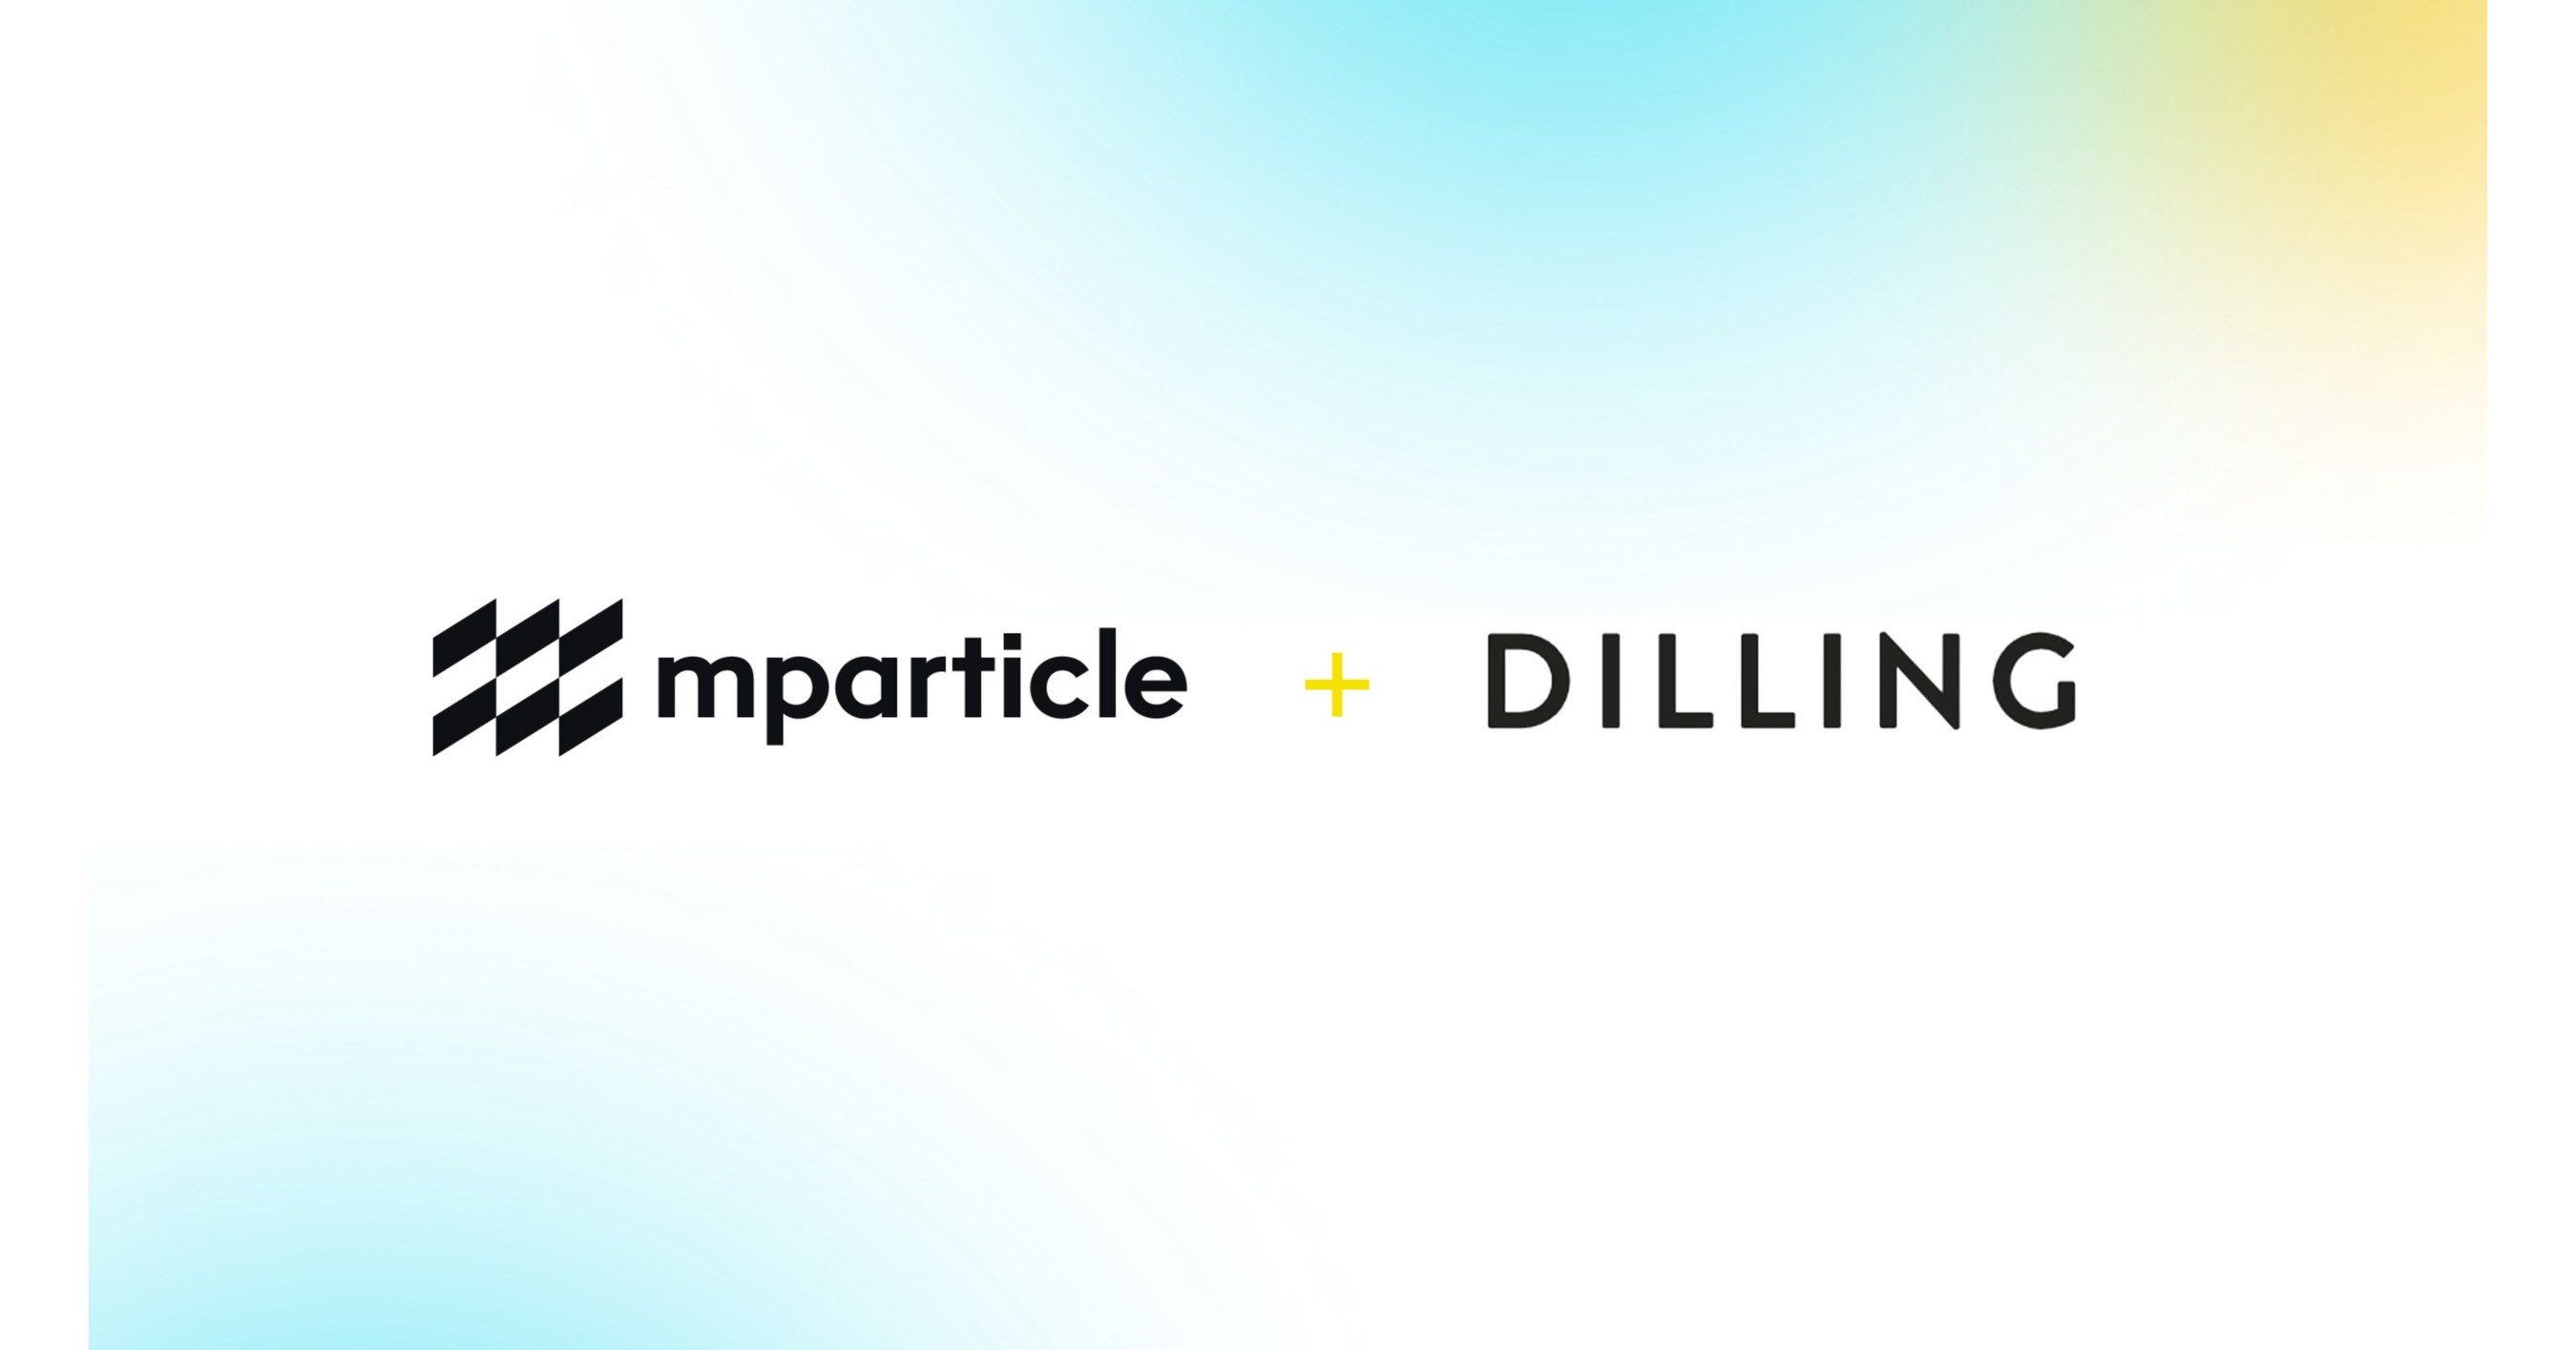 DILLING Lays the Foundation for Tailored Experiences with mParticle Customer Data Platform